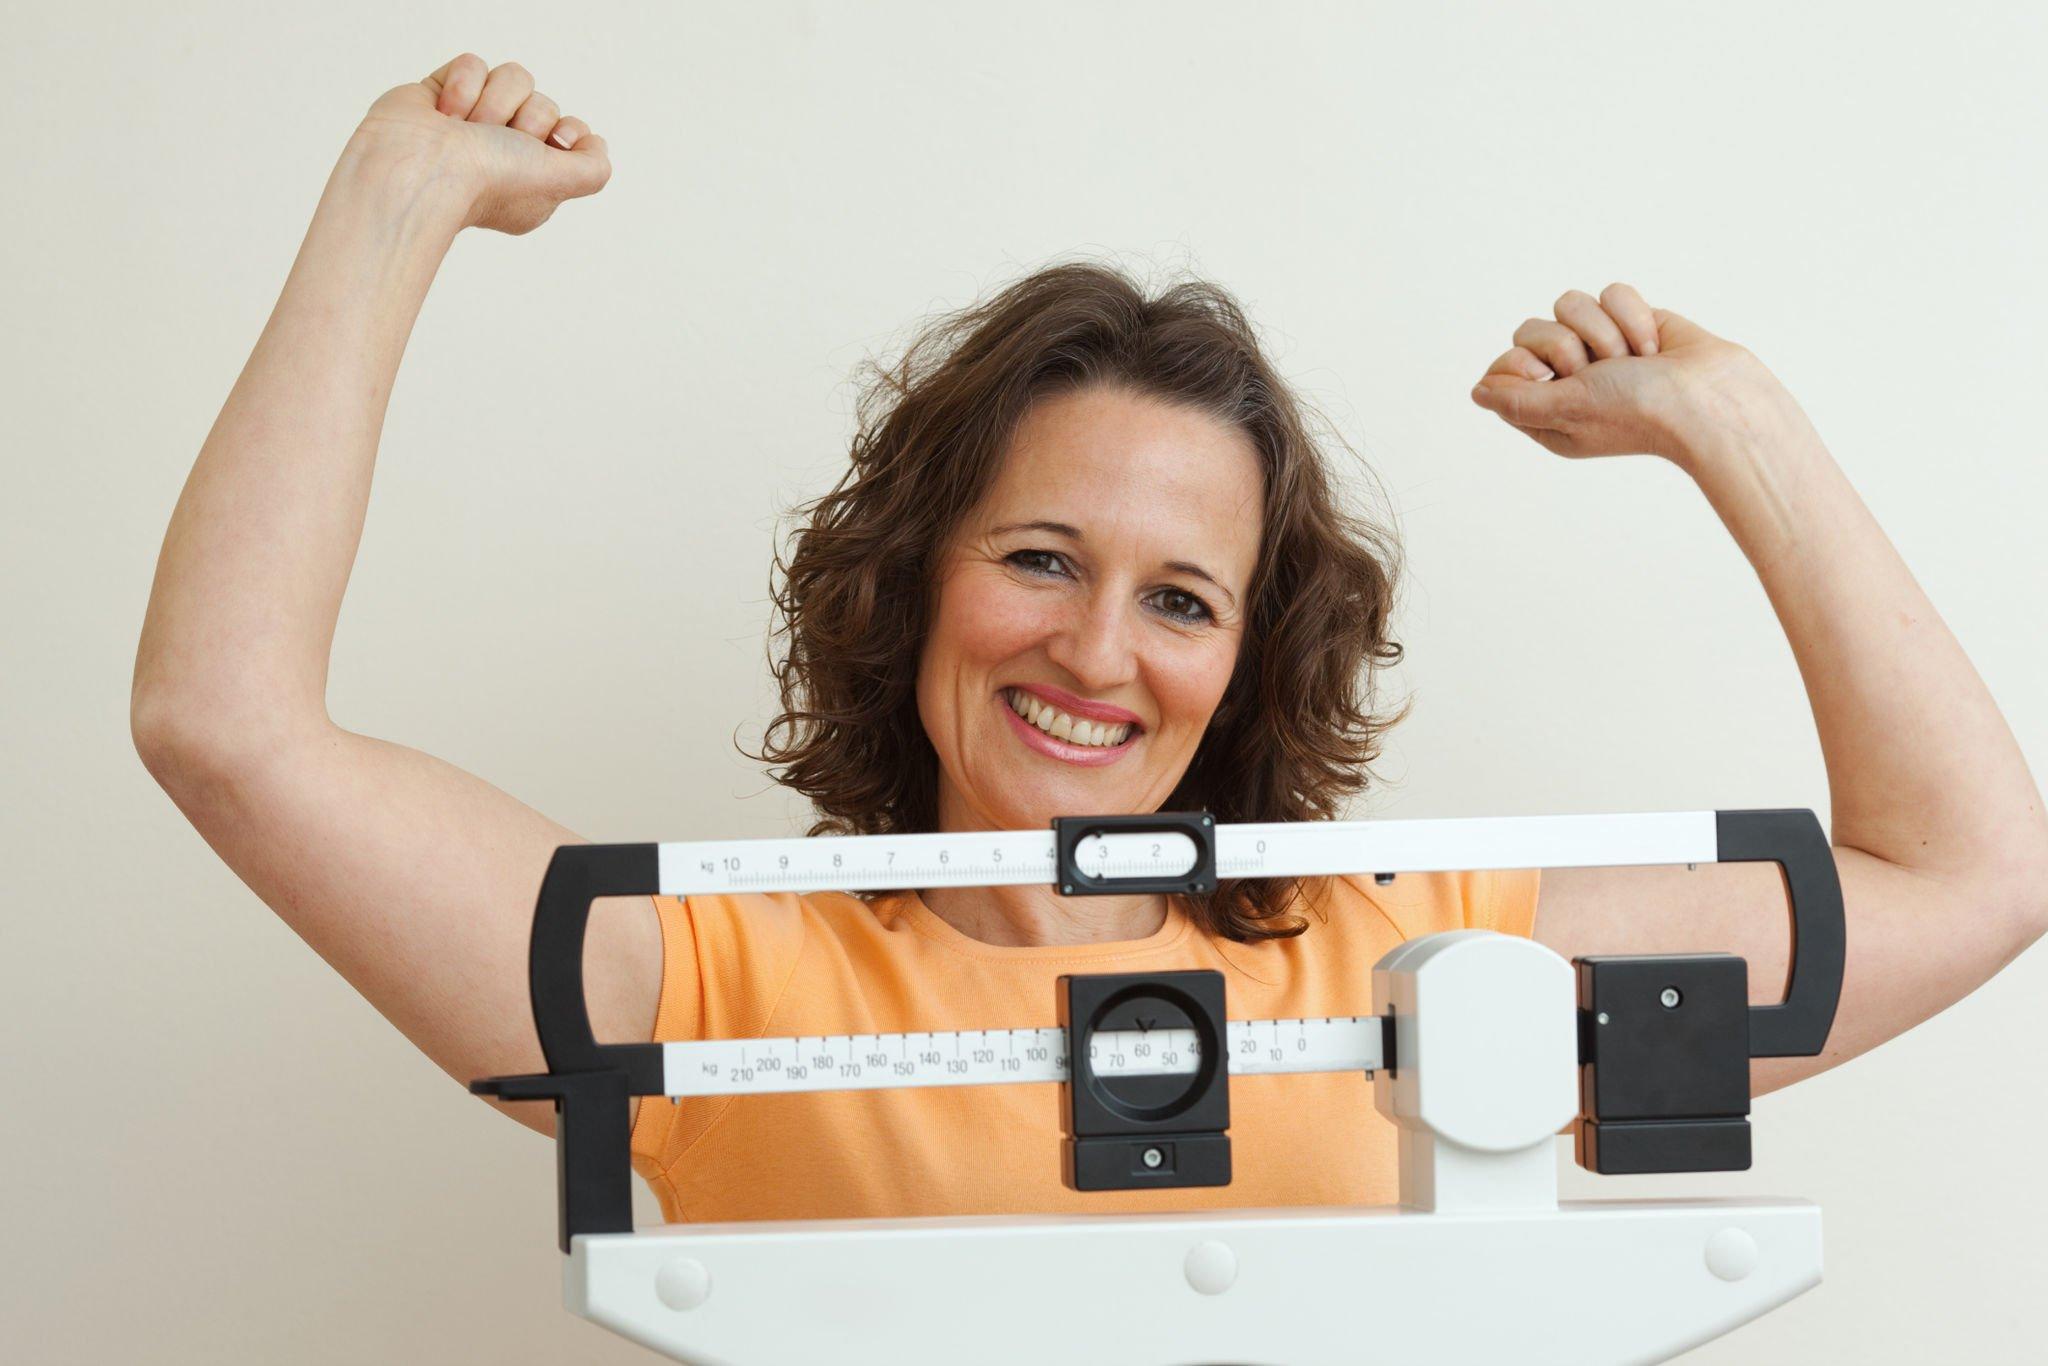 10 tips for weight loss success